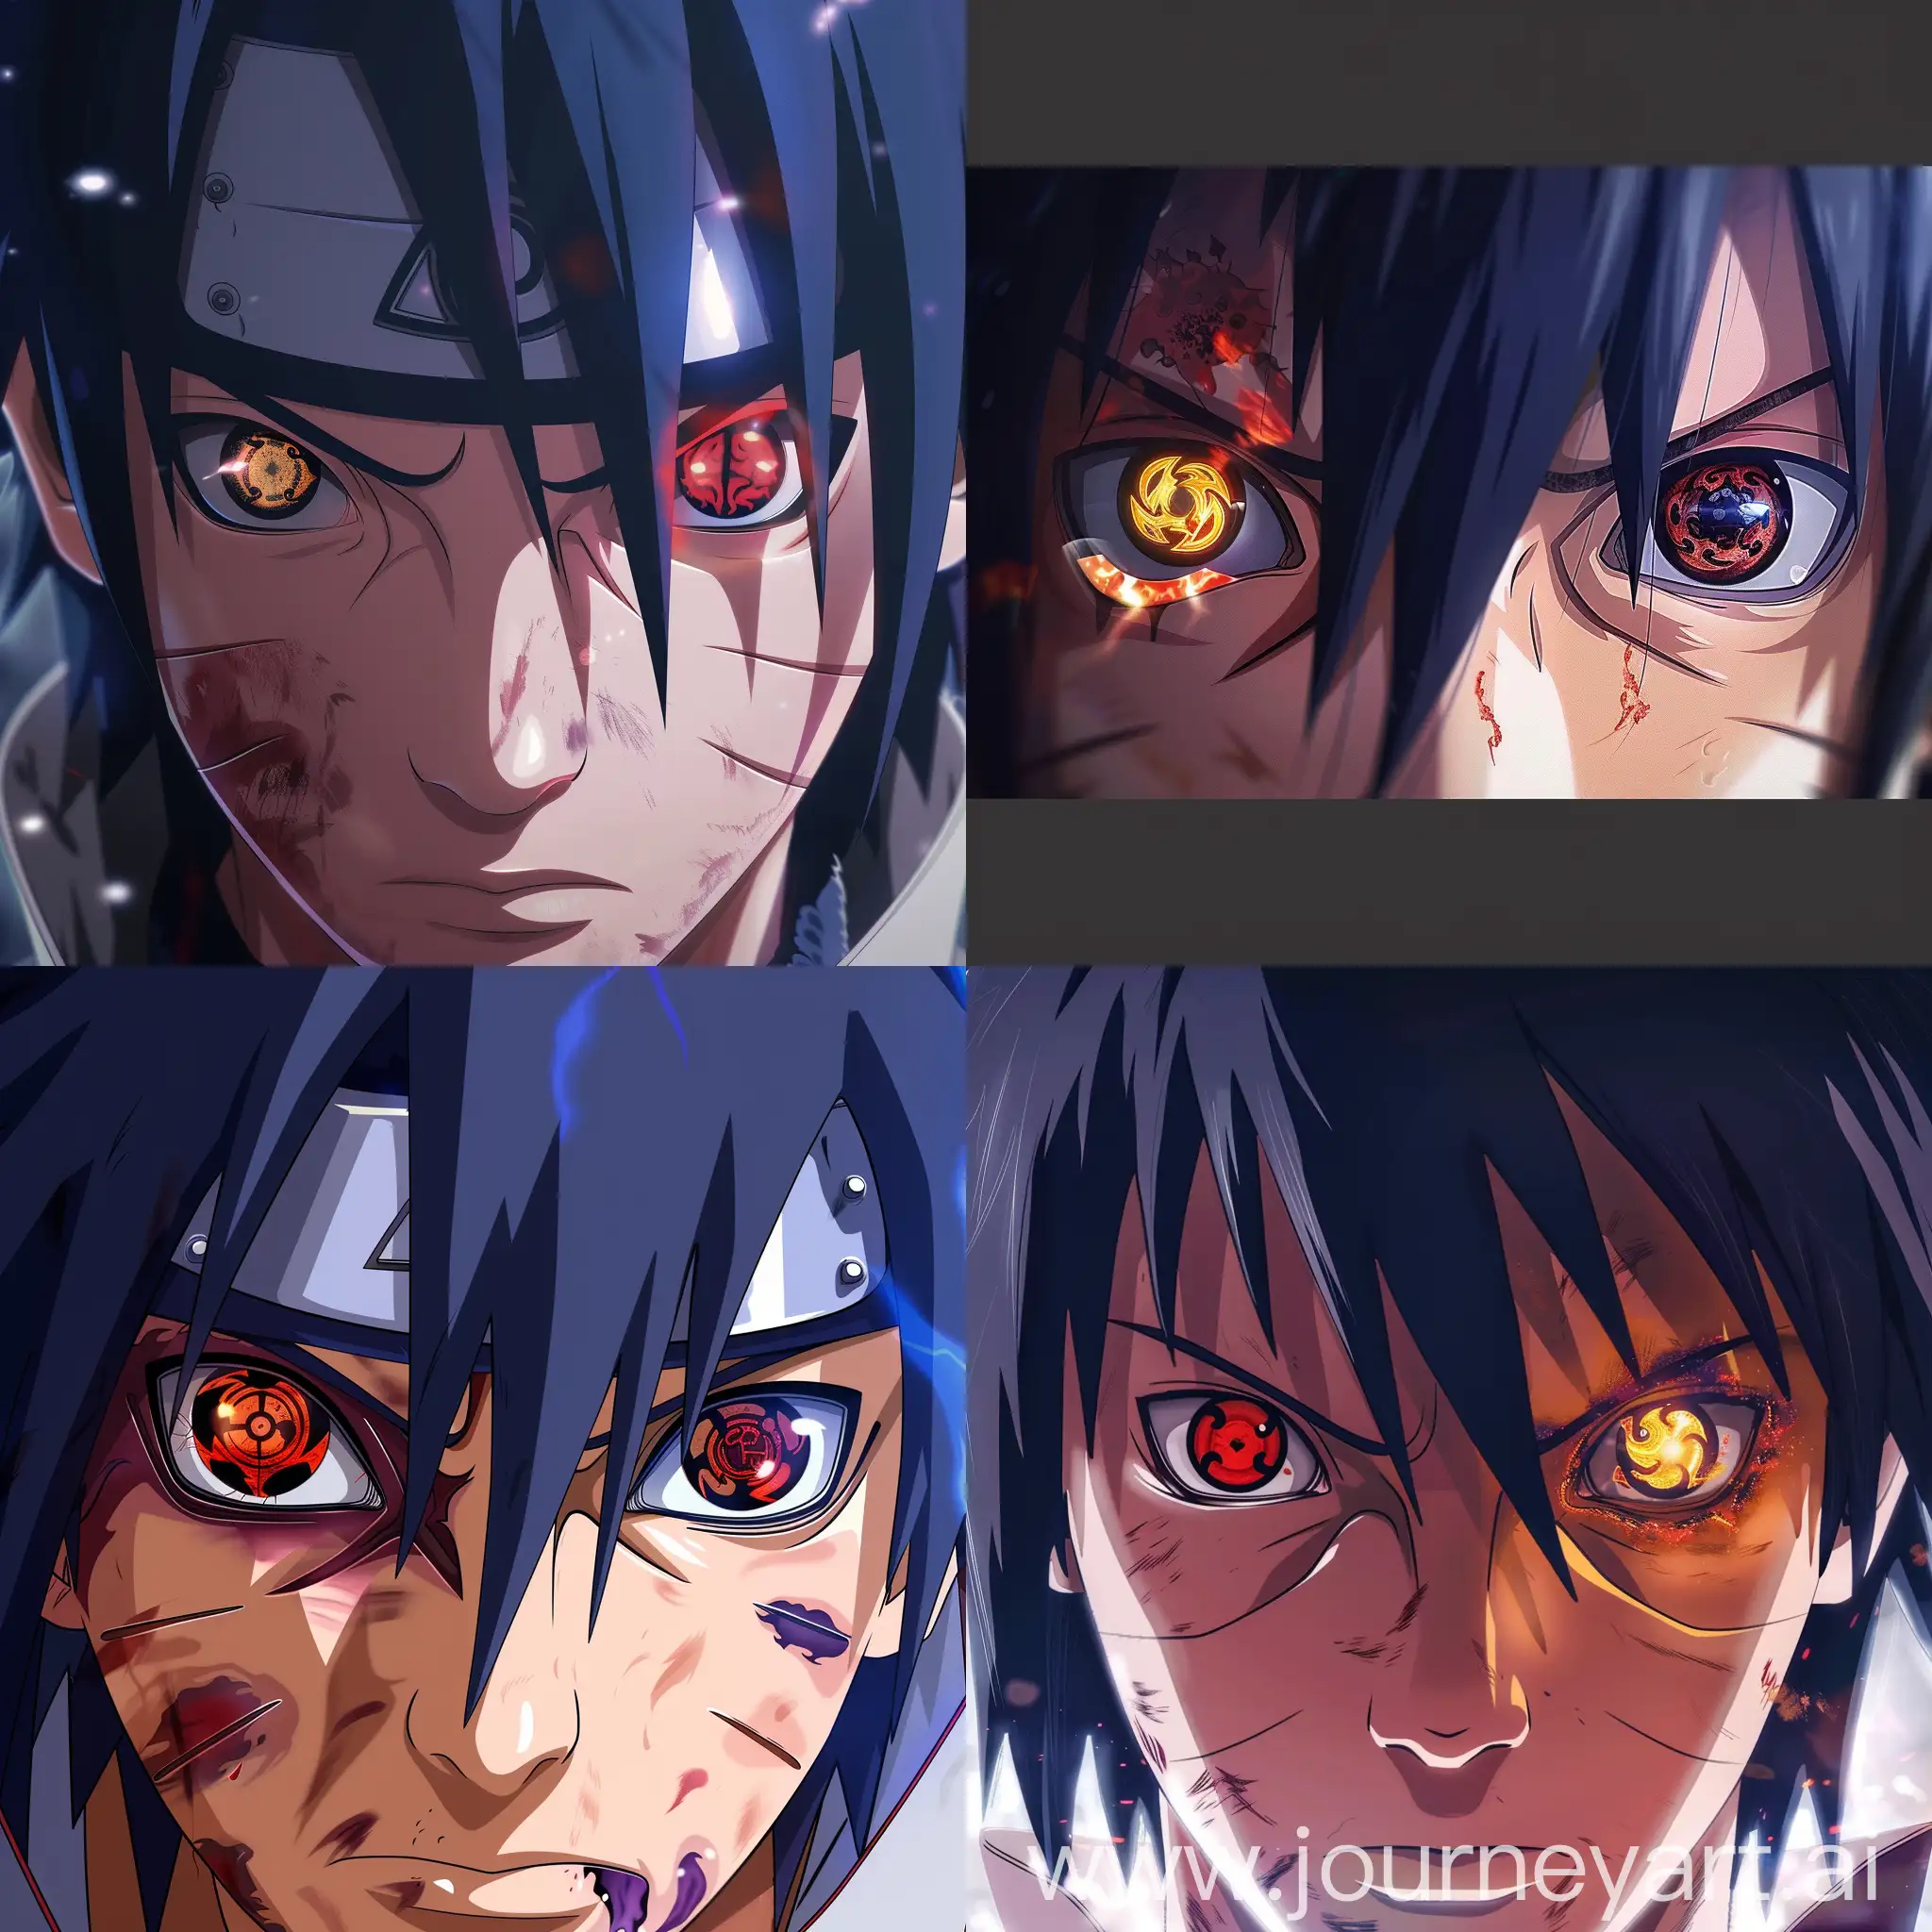 Anime style high quality high resolution high detailed cinematic realistic image of Sasuke uchiha with sharingan in one eye and rinnegan in other eye. Exact character as in anime